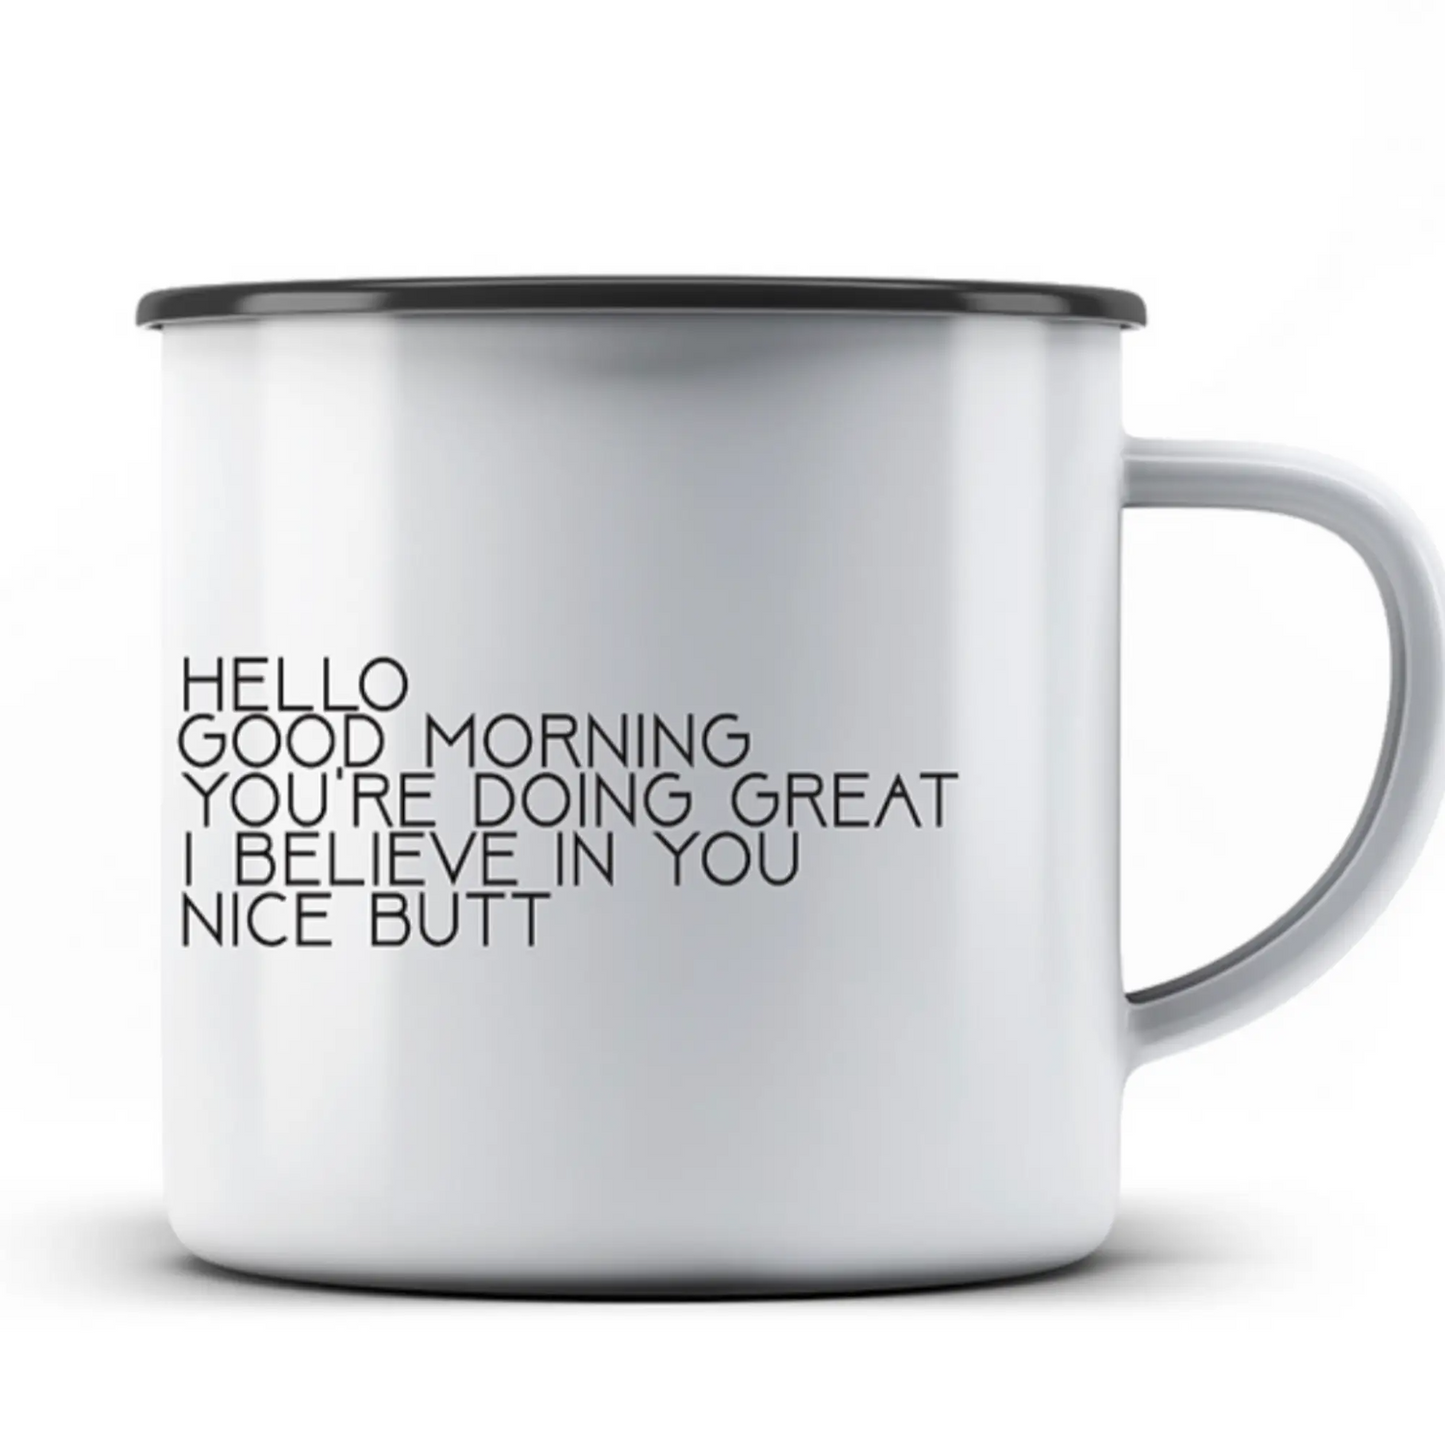 In Case No One Told You Today, Hello, Good Morning - 12-oz Camper Mug - Mellow Monkey